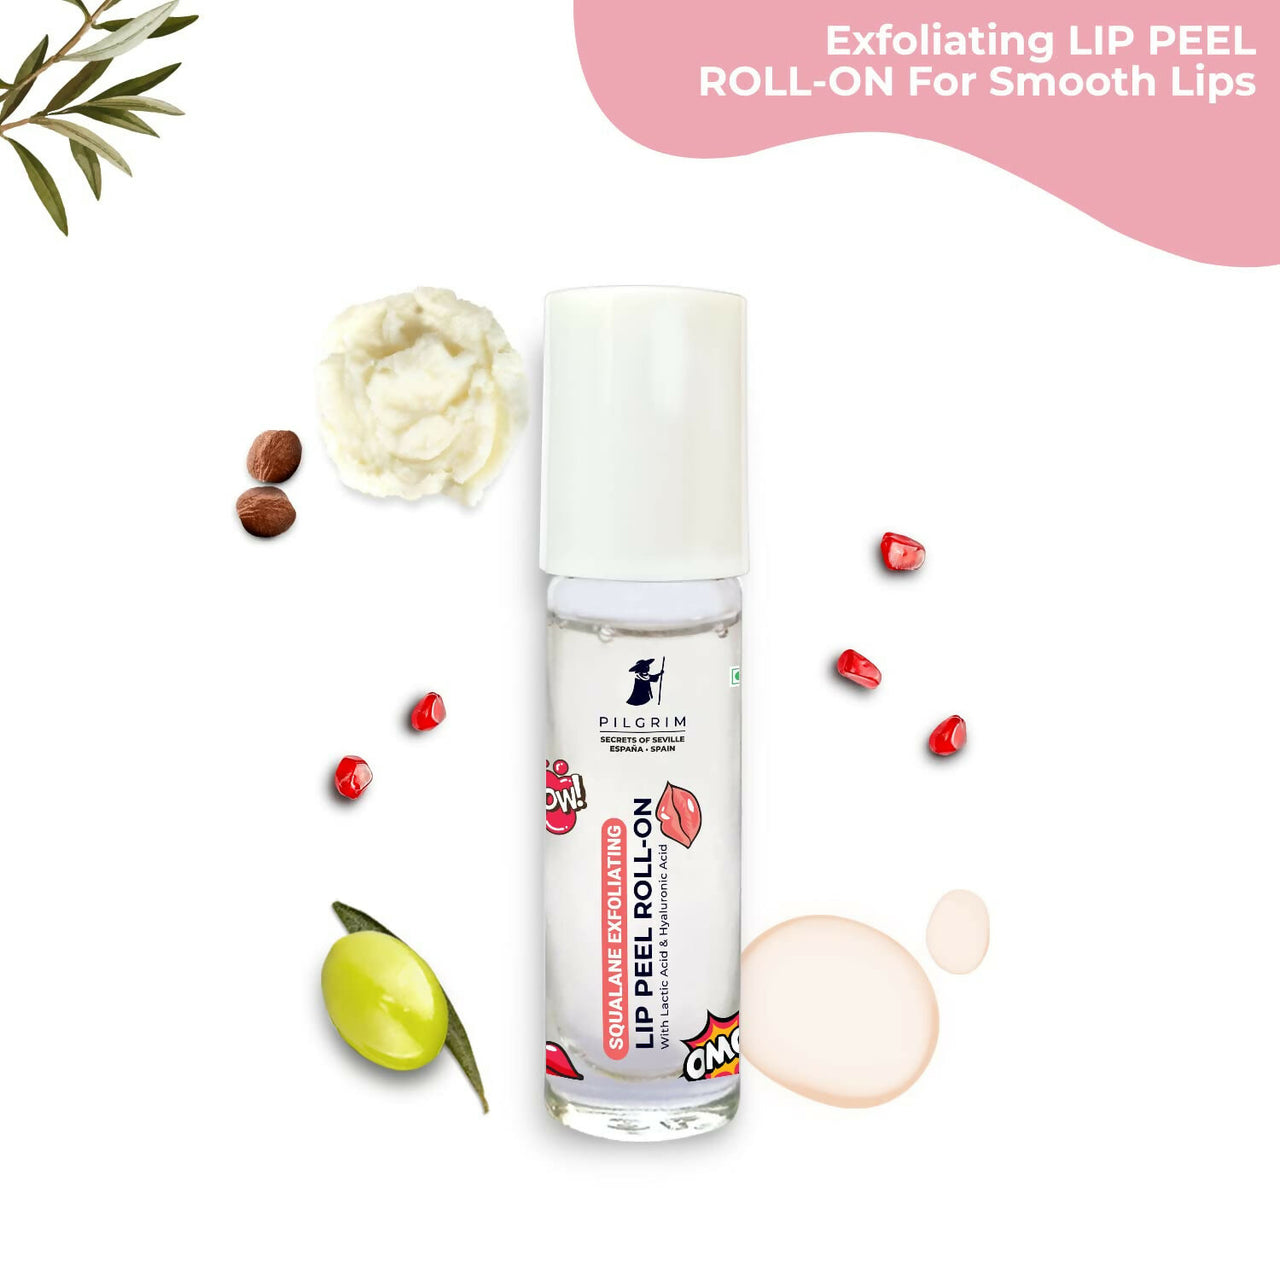 Pilgrim Spanish Lip Peel Roll-on with Lactic Acid & Hyaluronic Acid For Soft & Glossy Lips, Hydrating Dry & Flaky Lips - Distacart